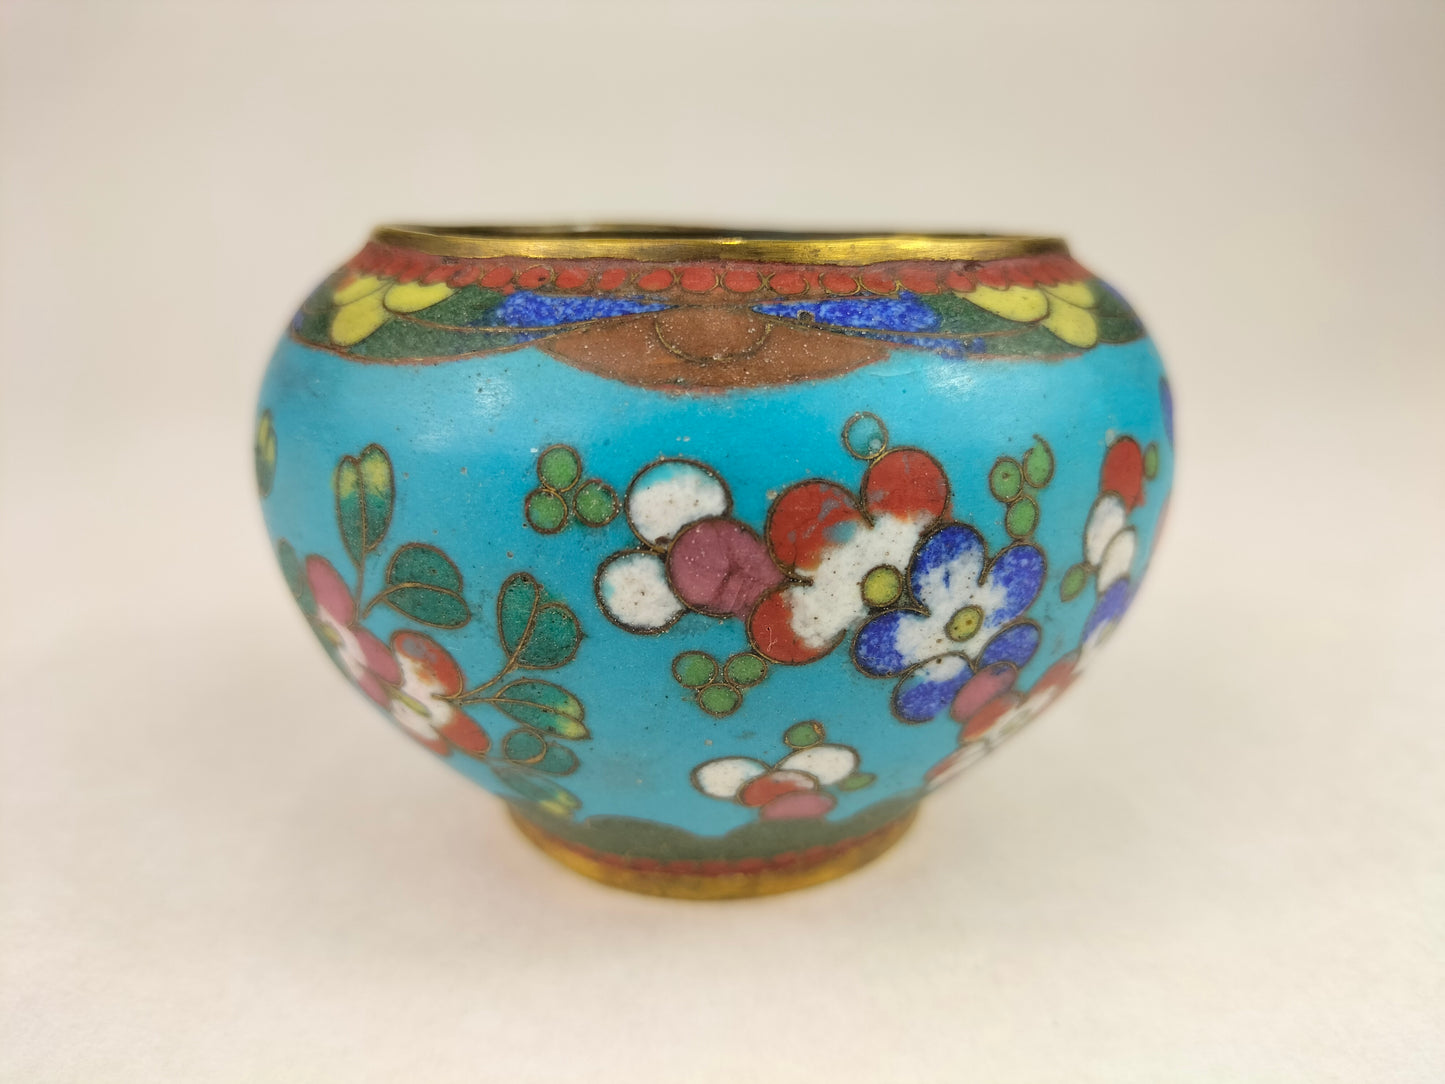 Antique Chinese cloisonne jar decorated with butterflies and floral motifs // Republic Period (1912-1949)